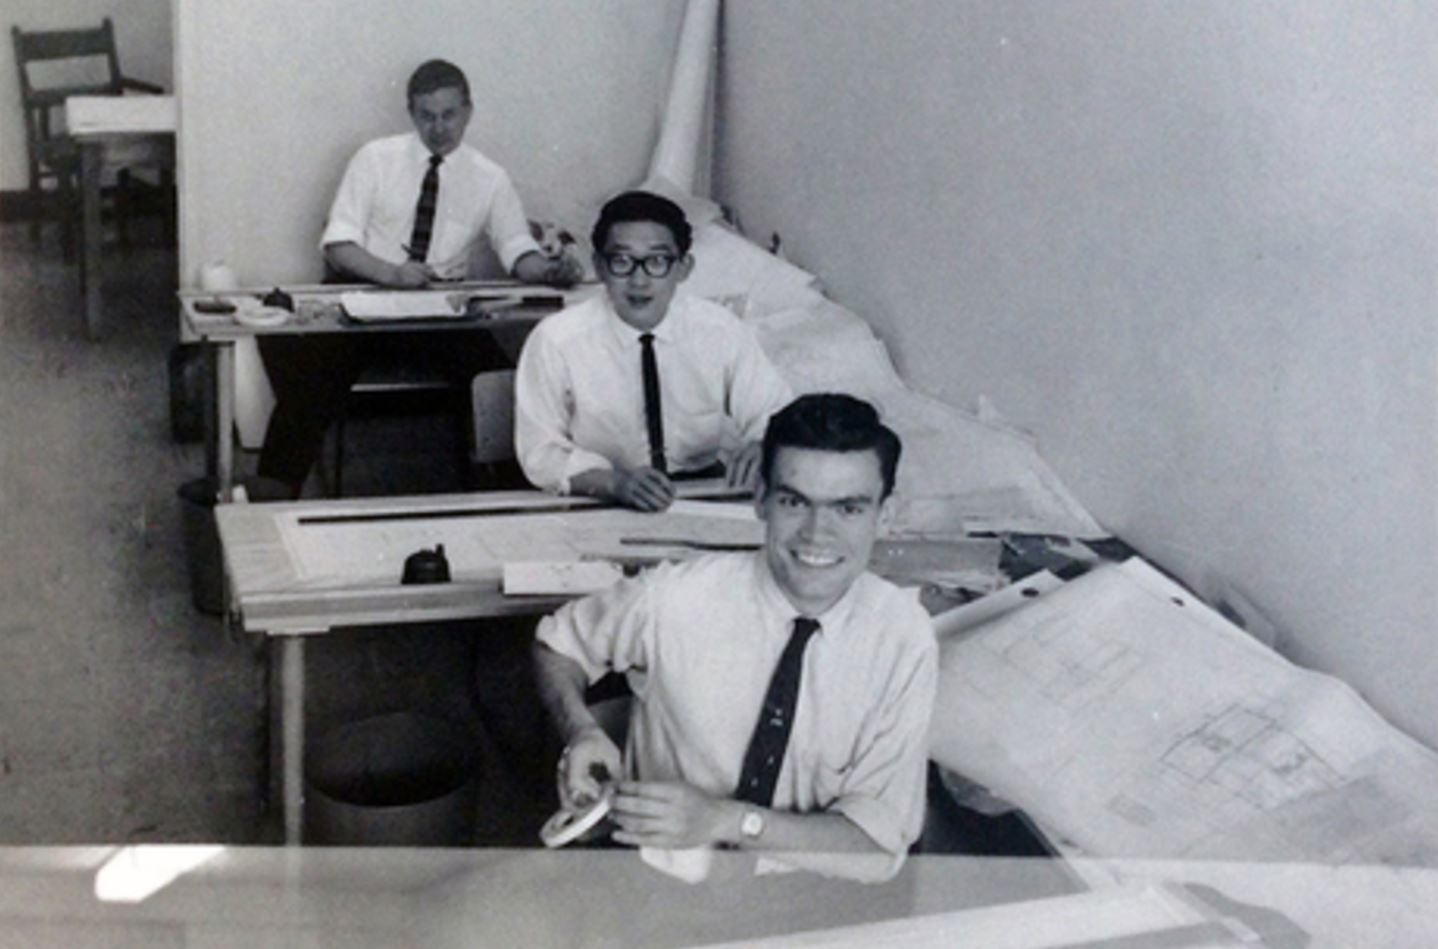 Unknown author (student summer job), Toronto, May 1959. George Baird (front), Ted Teshima (behind). Courtesy of Canadian Architectural Archives, University of Calgary.